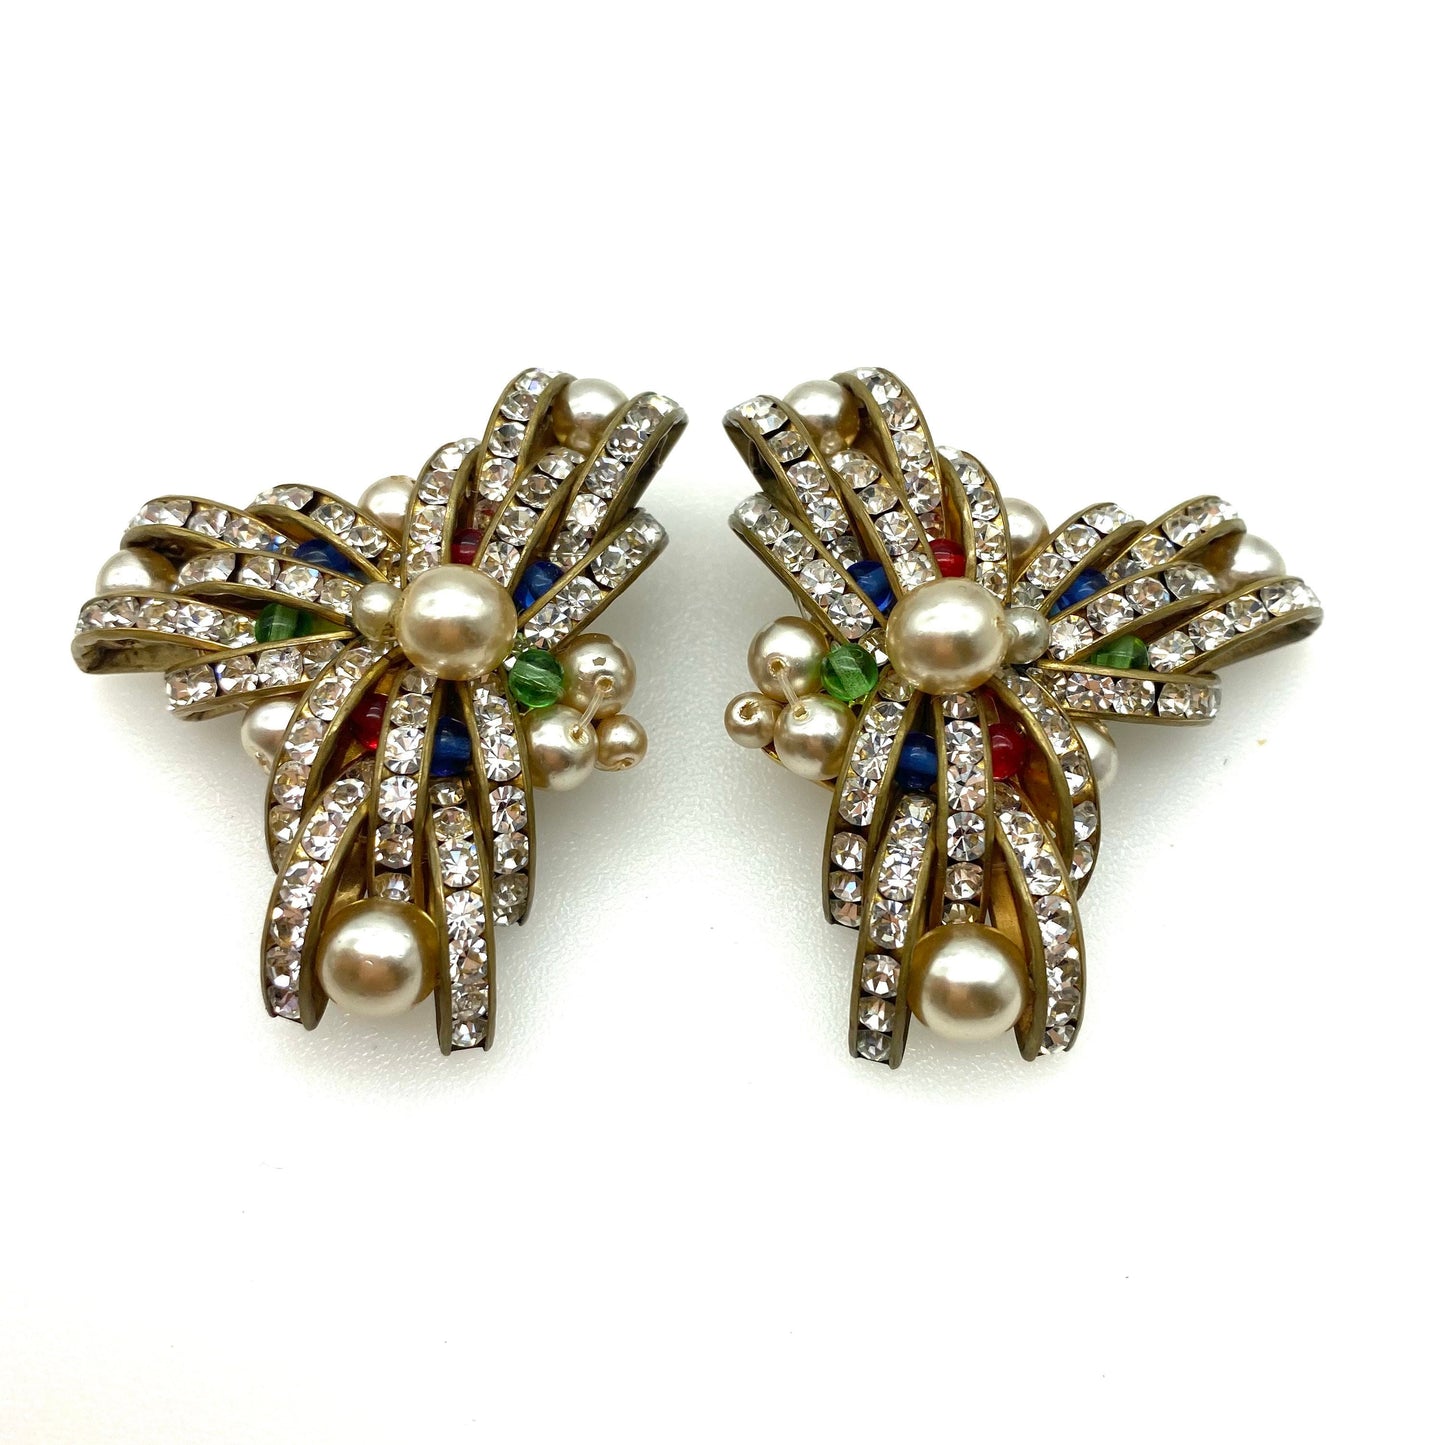 Art Deco Huge Channel Set Crystal Clip On Earrings with Glass Beads and Faux Pearls